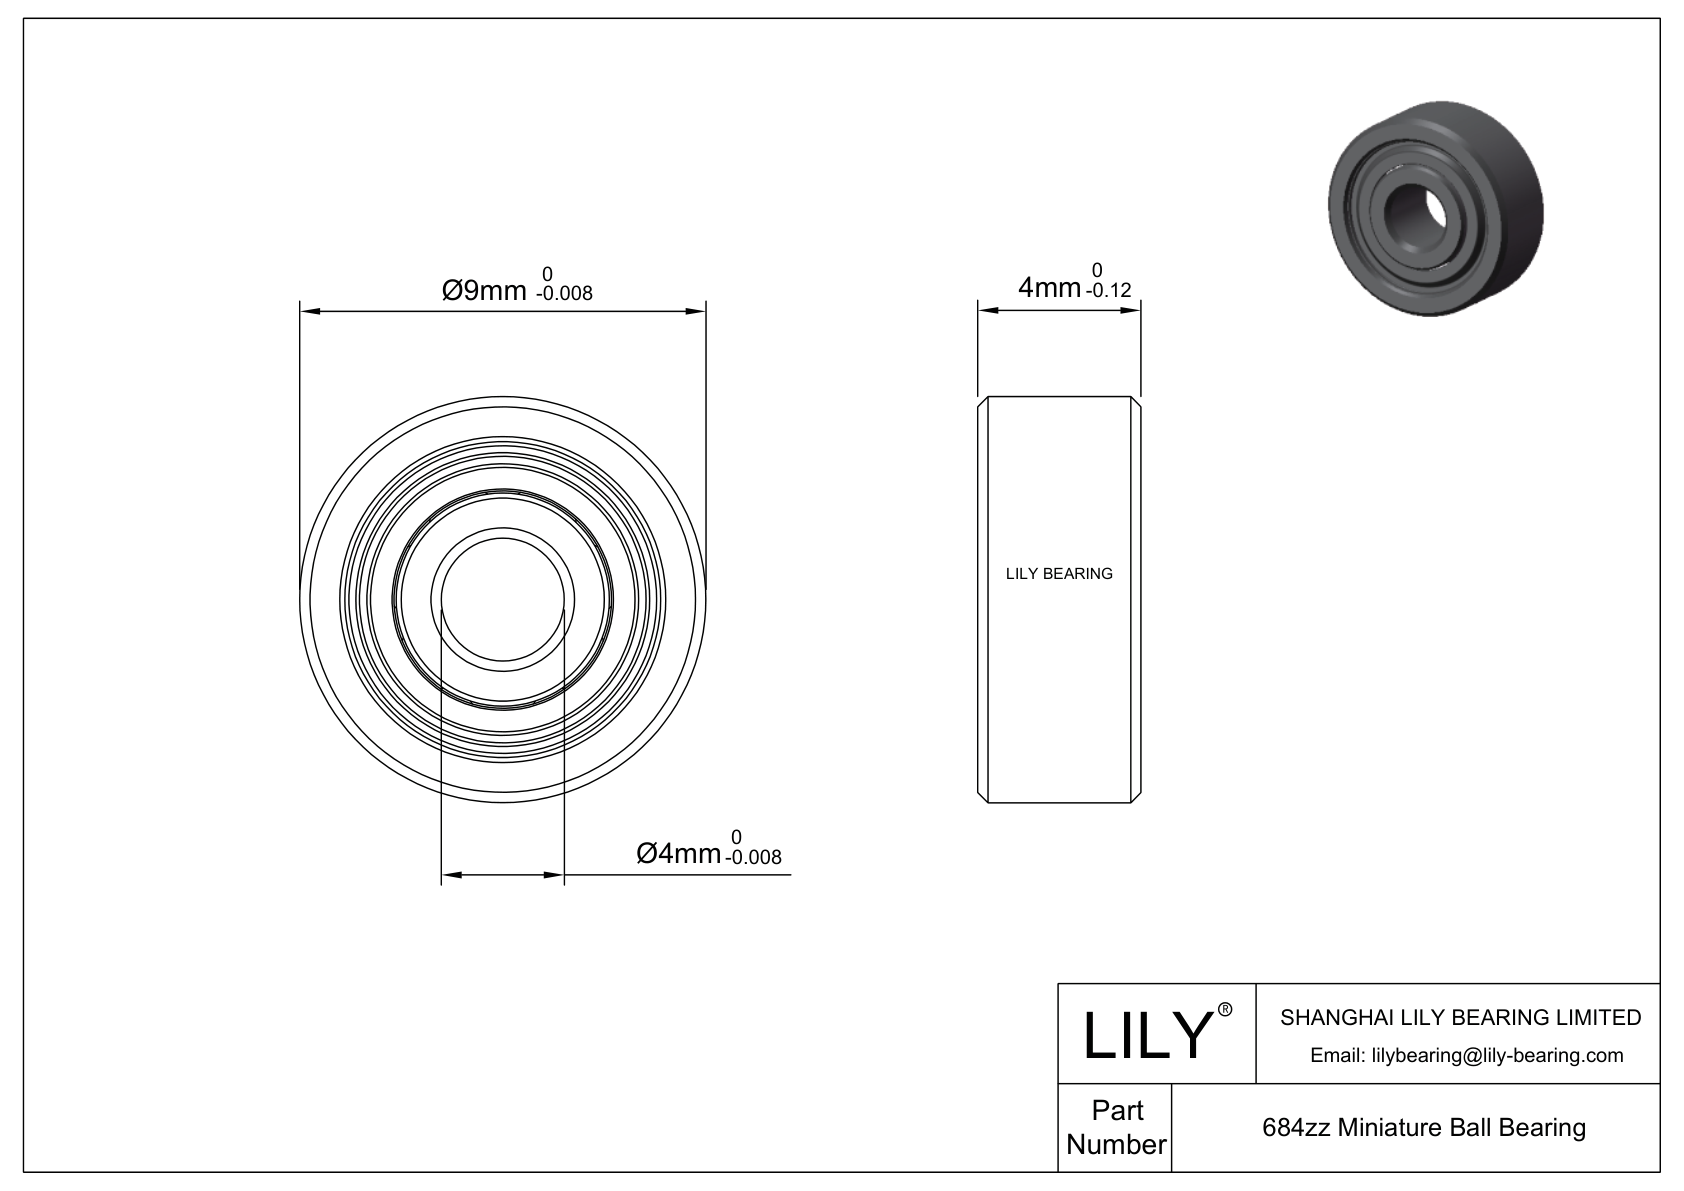 LILY-BS68411-4 POM Coated Bearing cad drawing